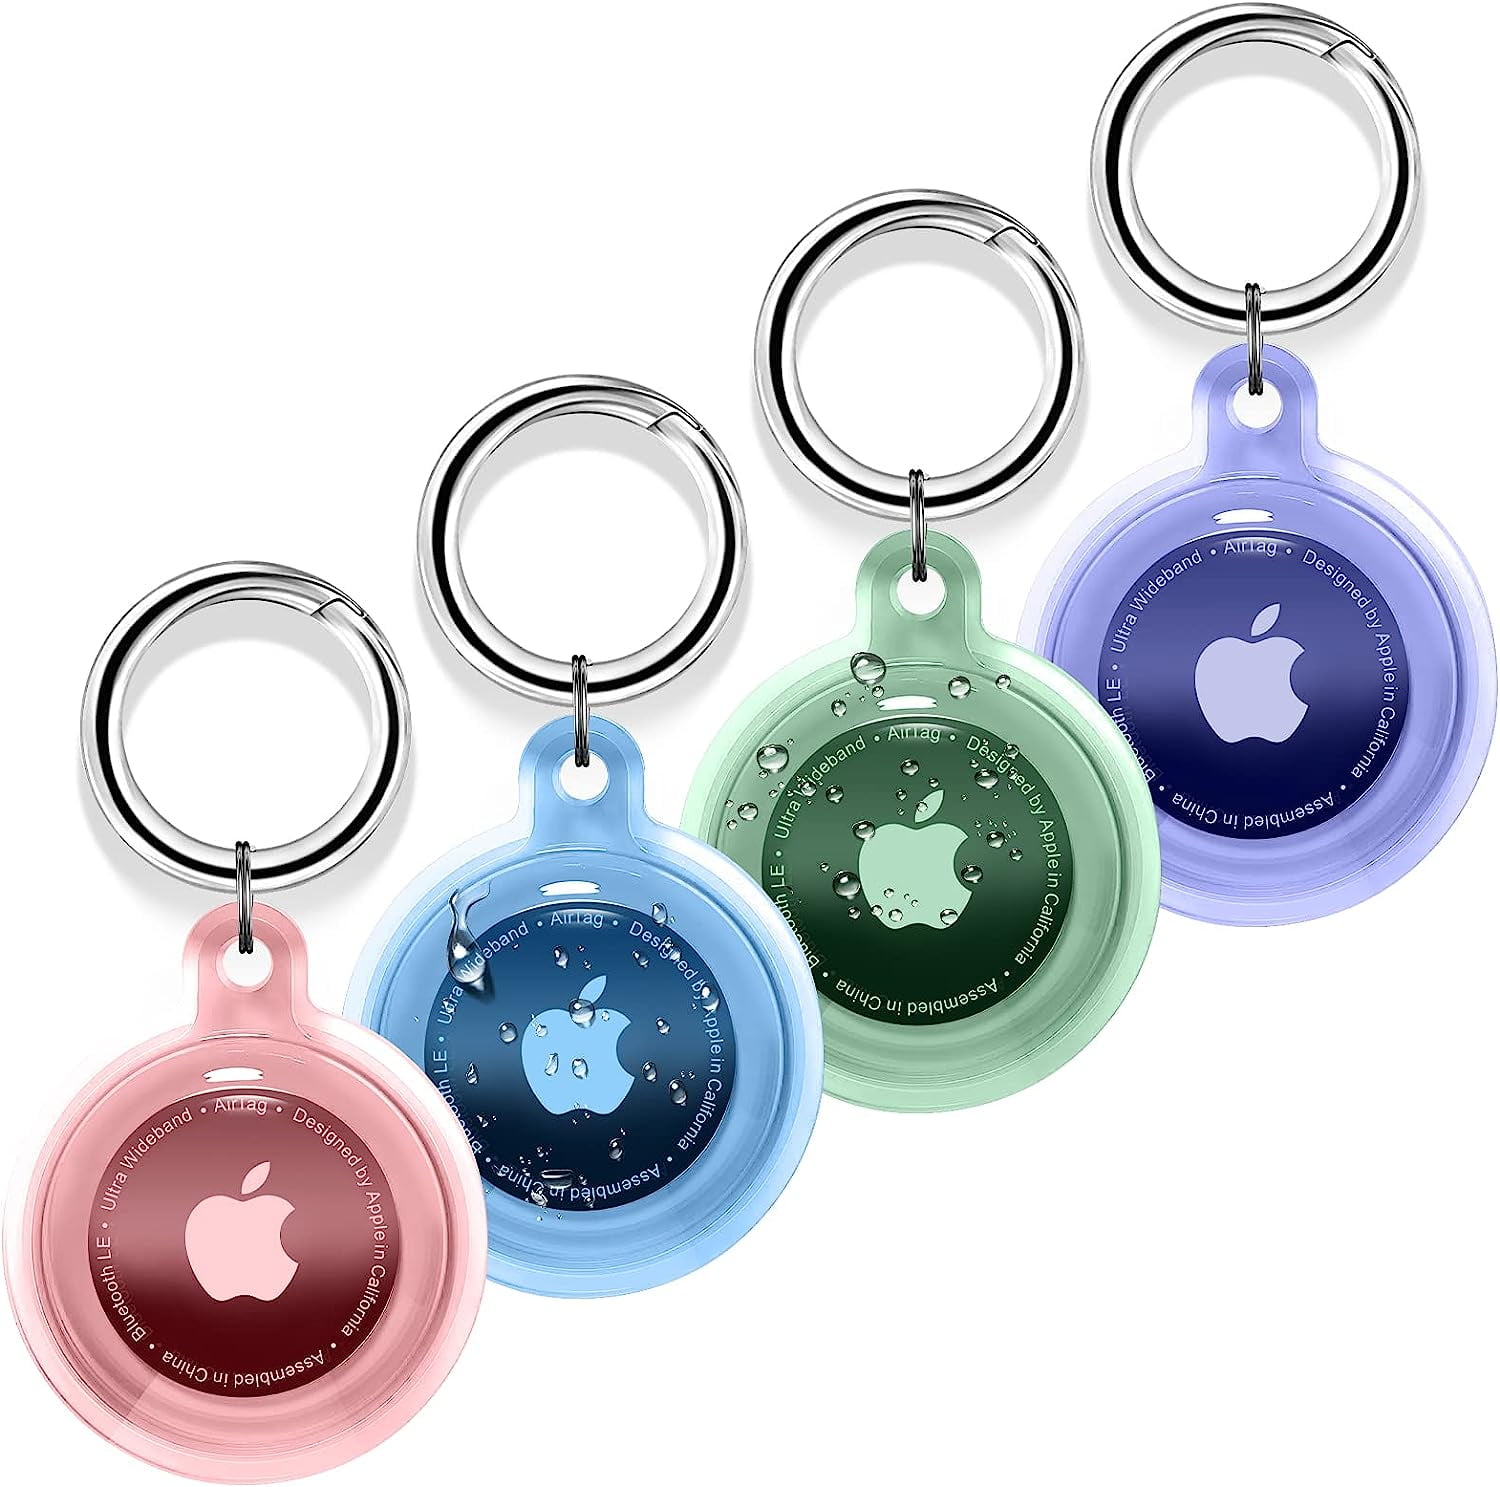 UAG - U Dot Keychain For Apple Airtag Price and Features